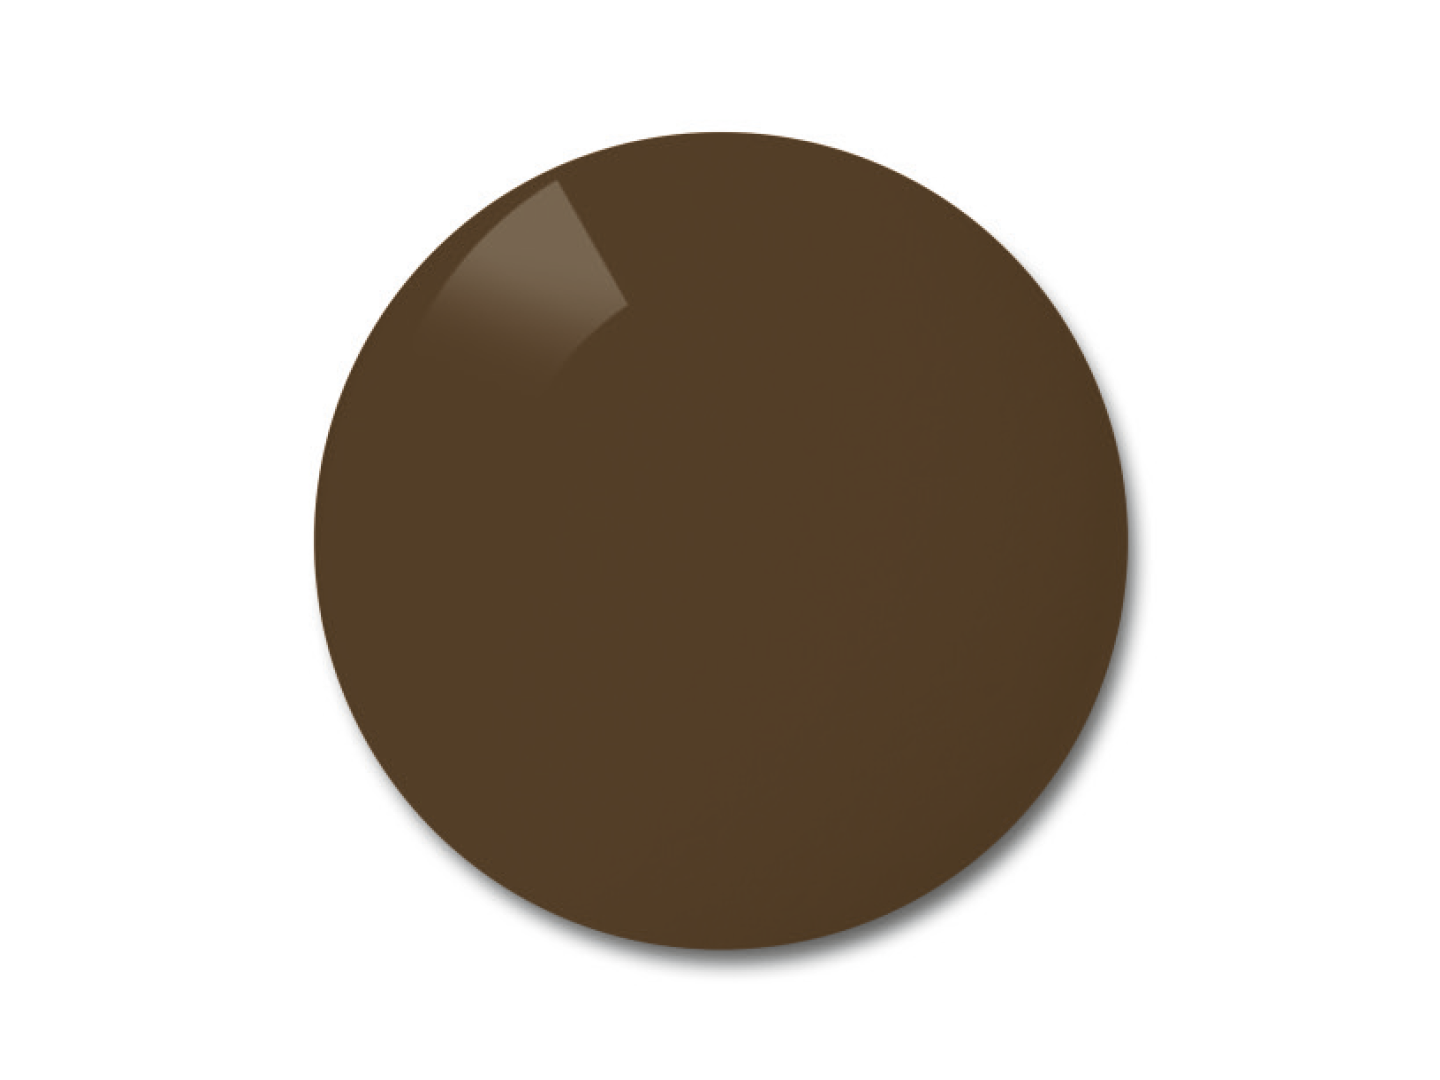 Colour example for the brown polarised lenses. 